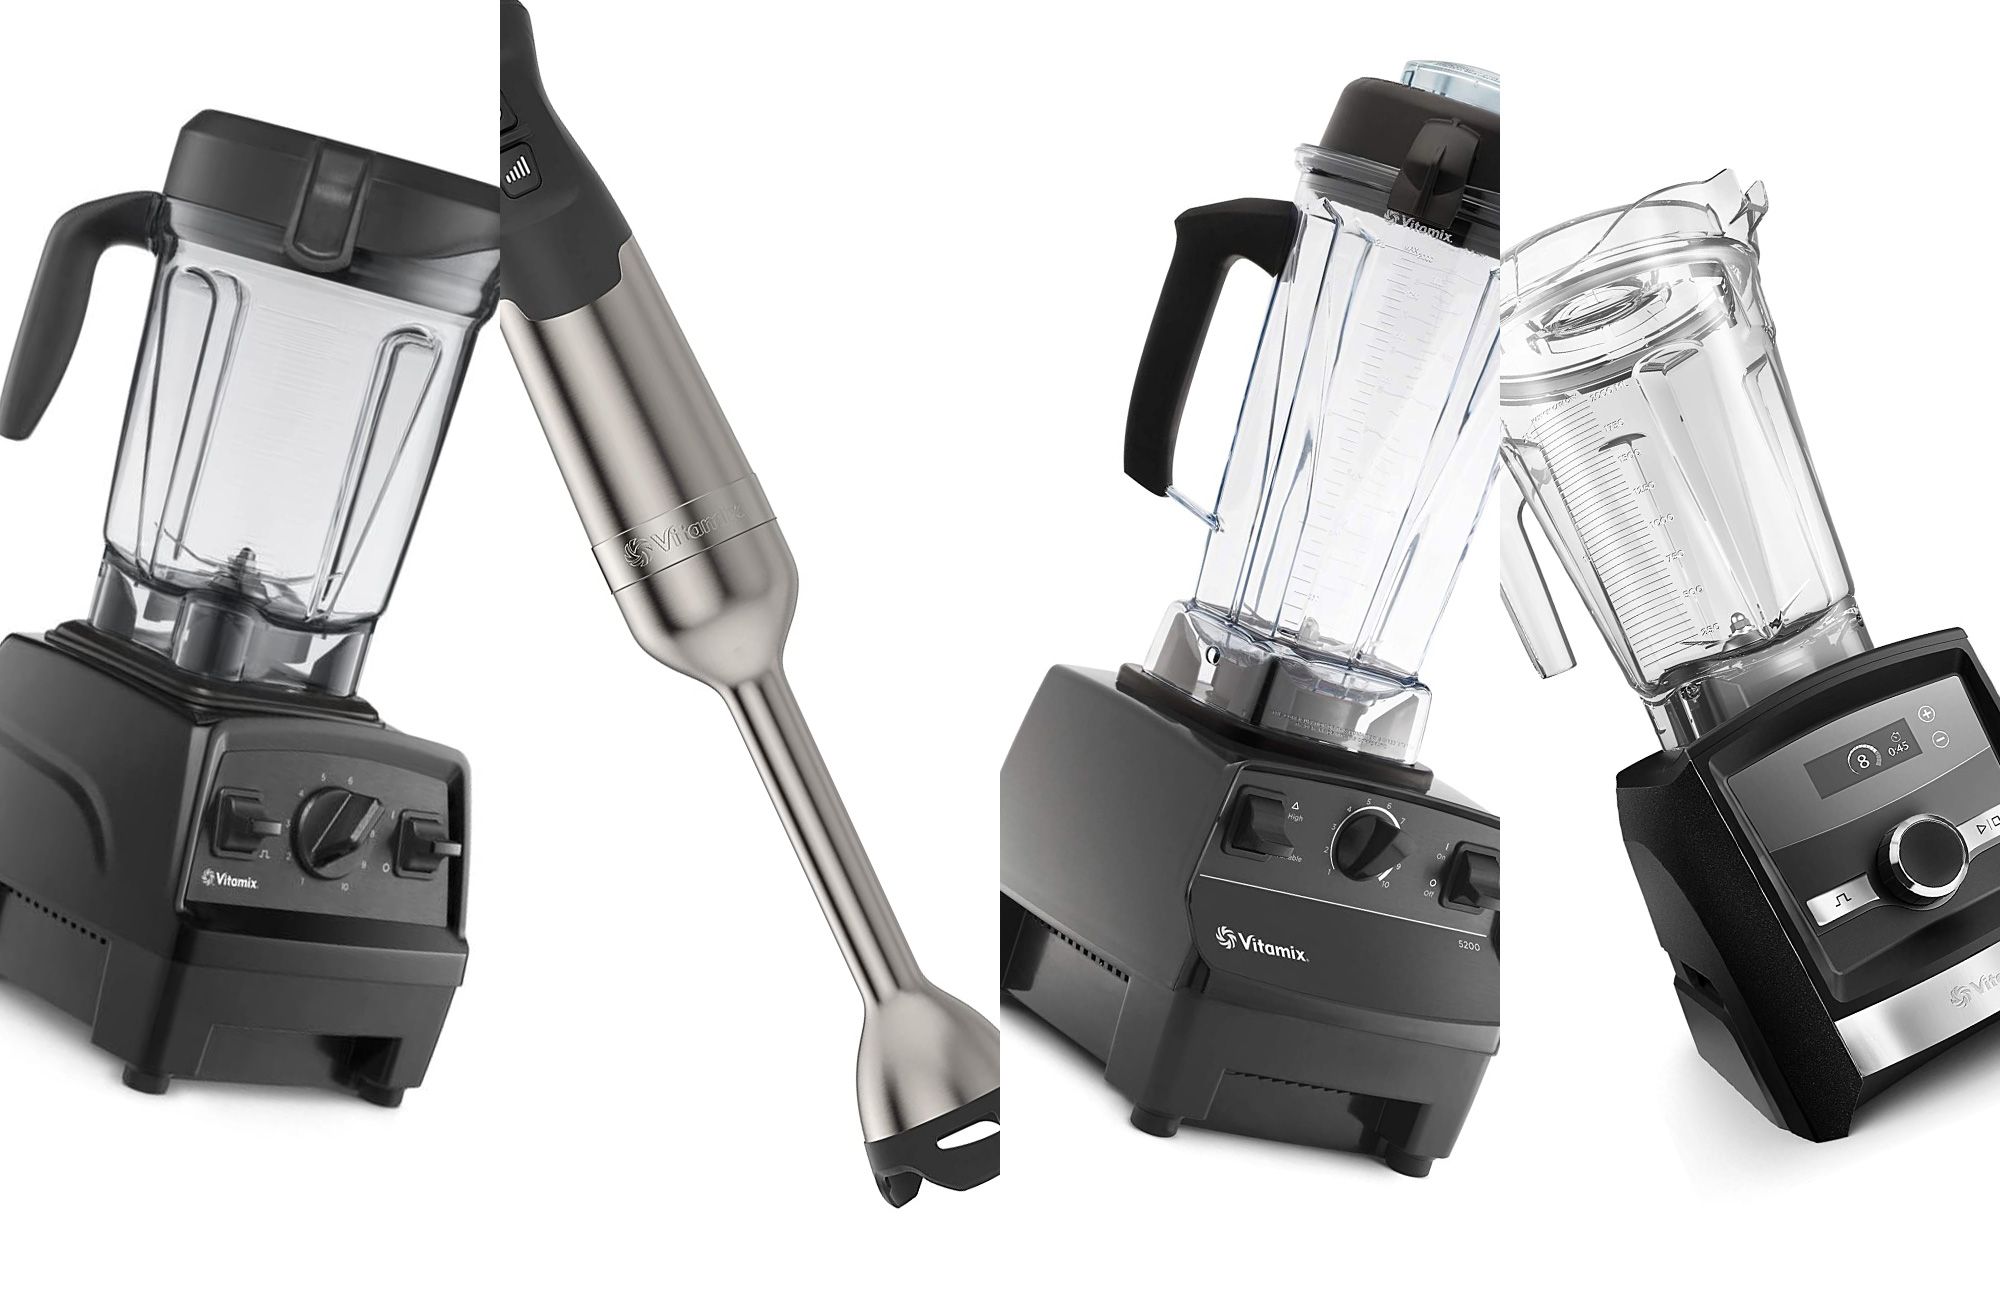 Jump on this rare Vitamix Black Friday deal Popular Science